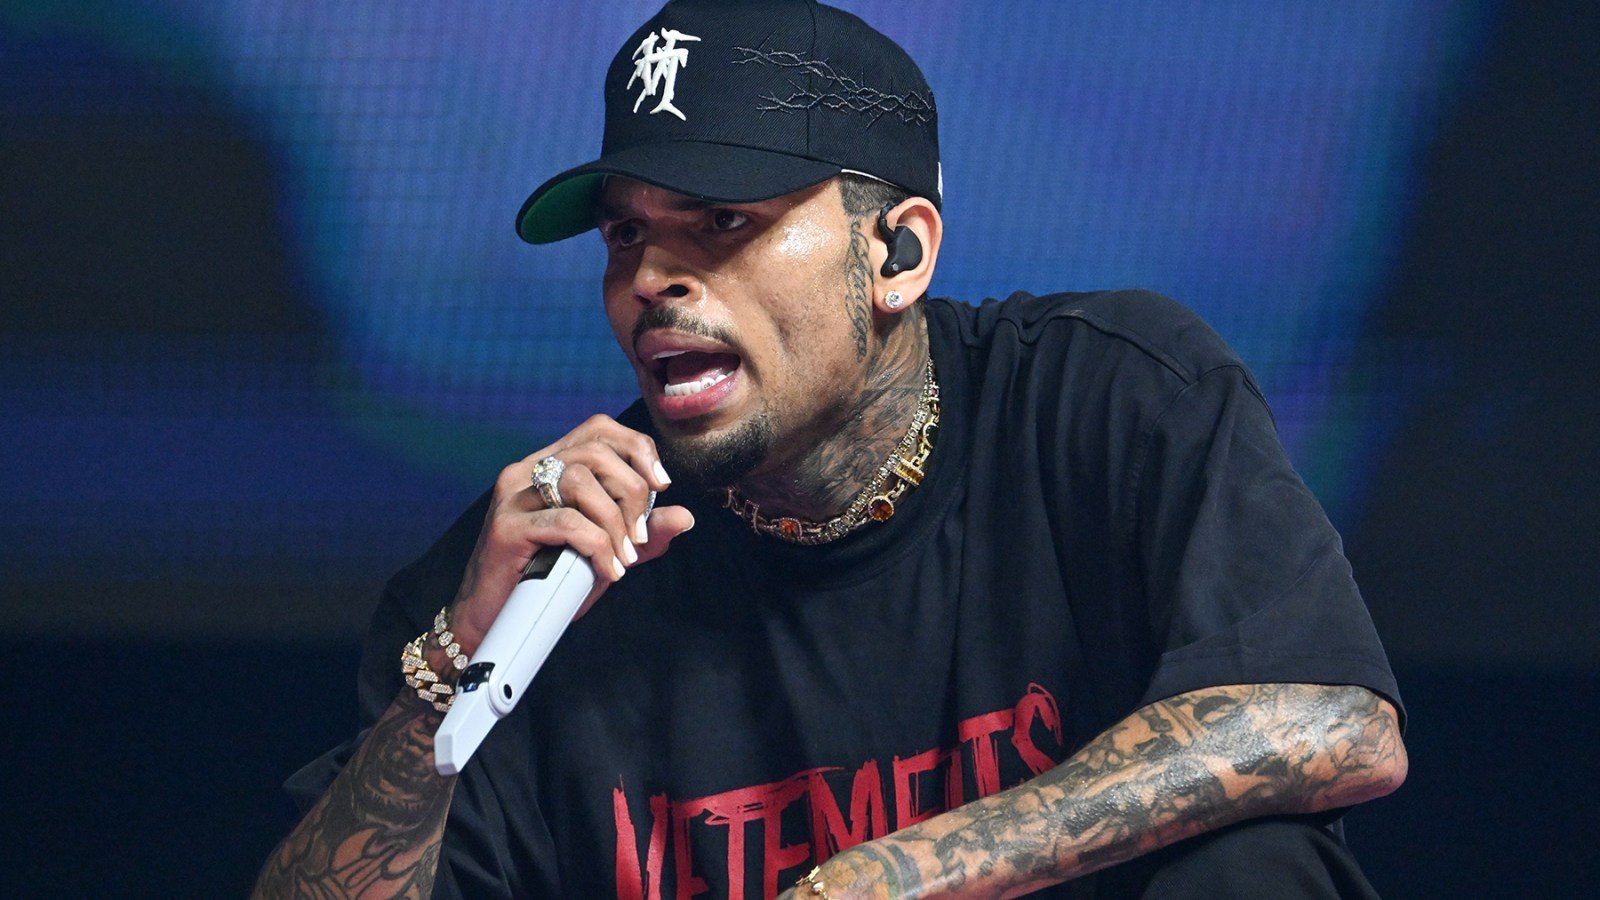 Chris Brown Sued for $15 Million by Security Guard Over Alleged Backstage Assault